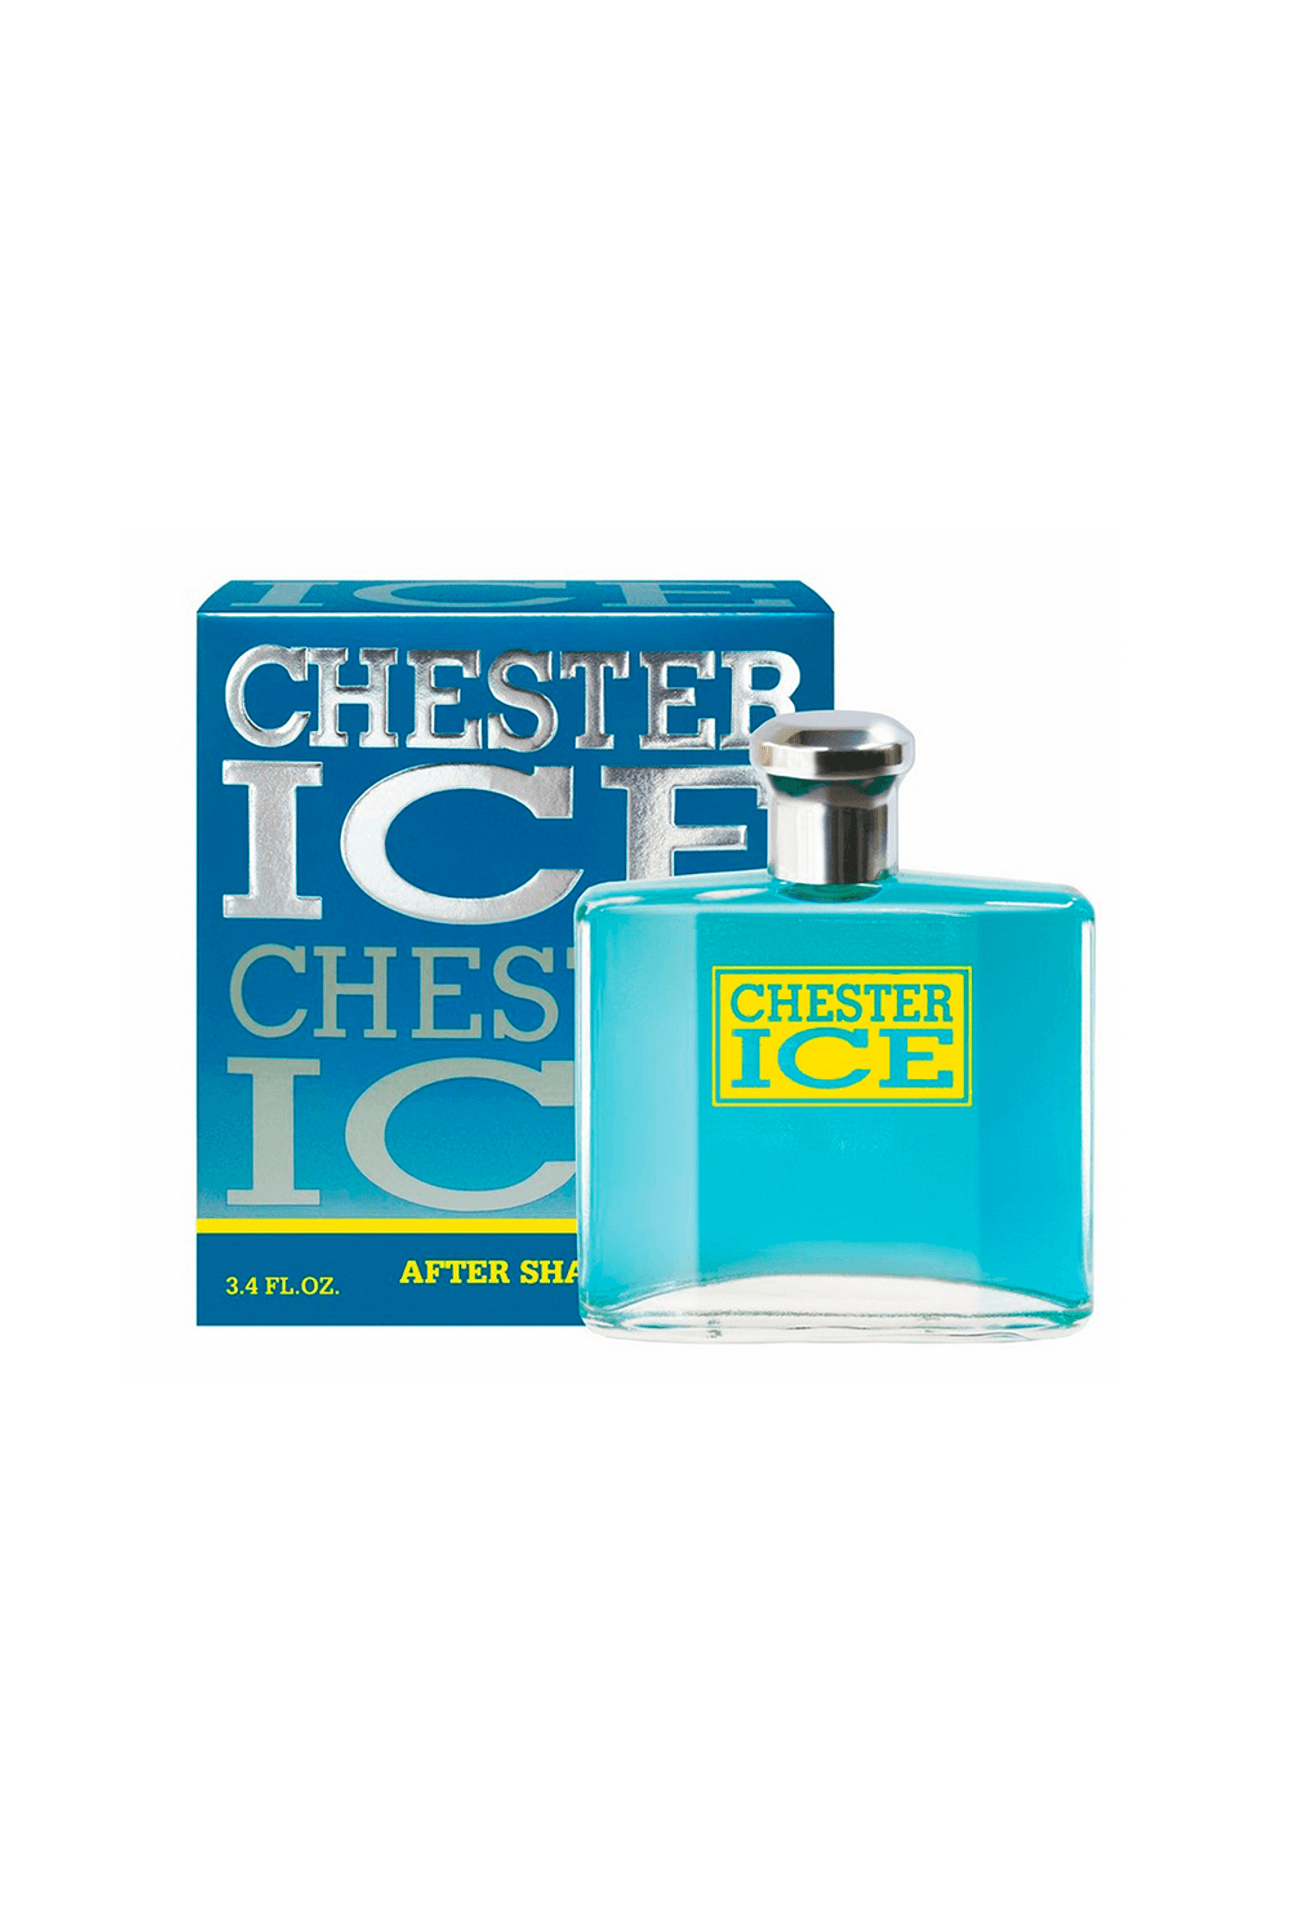 Chester-Ice-After-Shave-Chester-Ice-x-100ml-7791600060367_img1